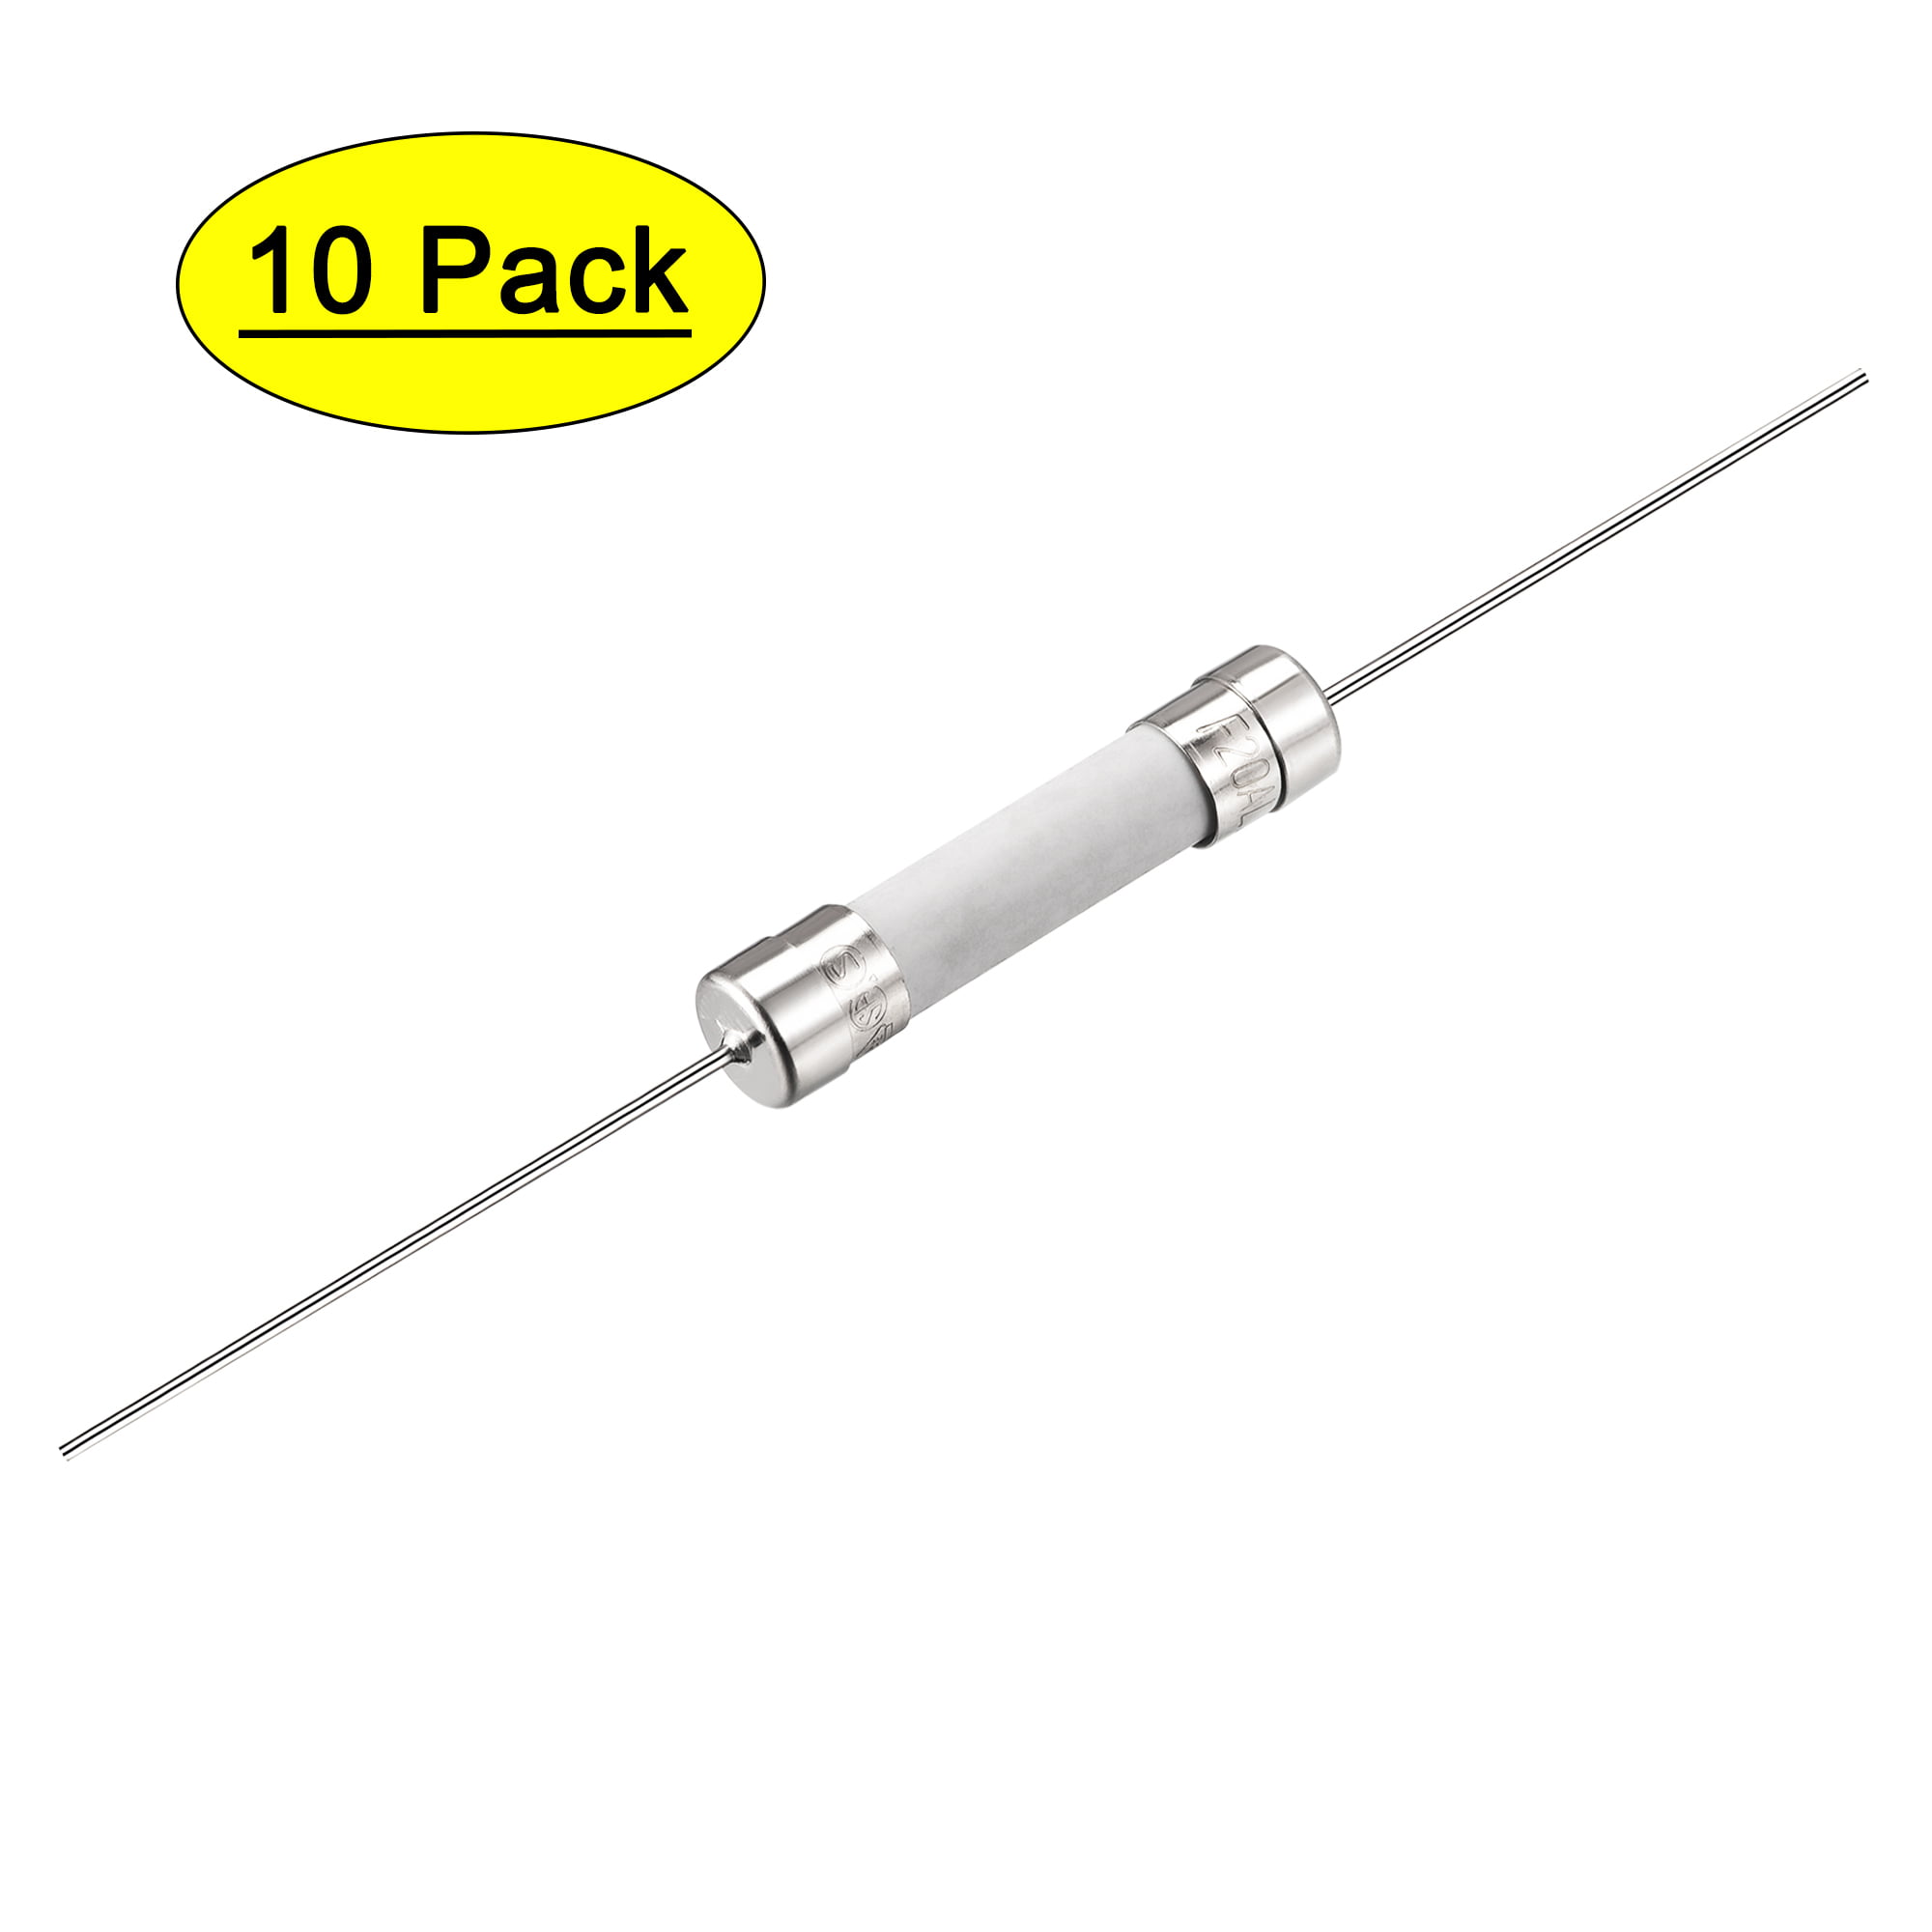 5A 32MM QUICK BLOW FUSE PACK 5 